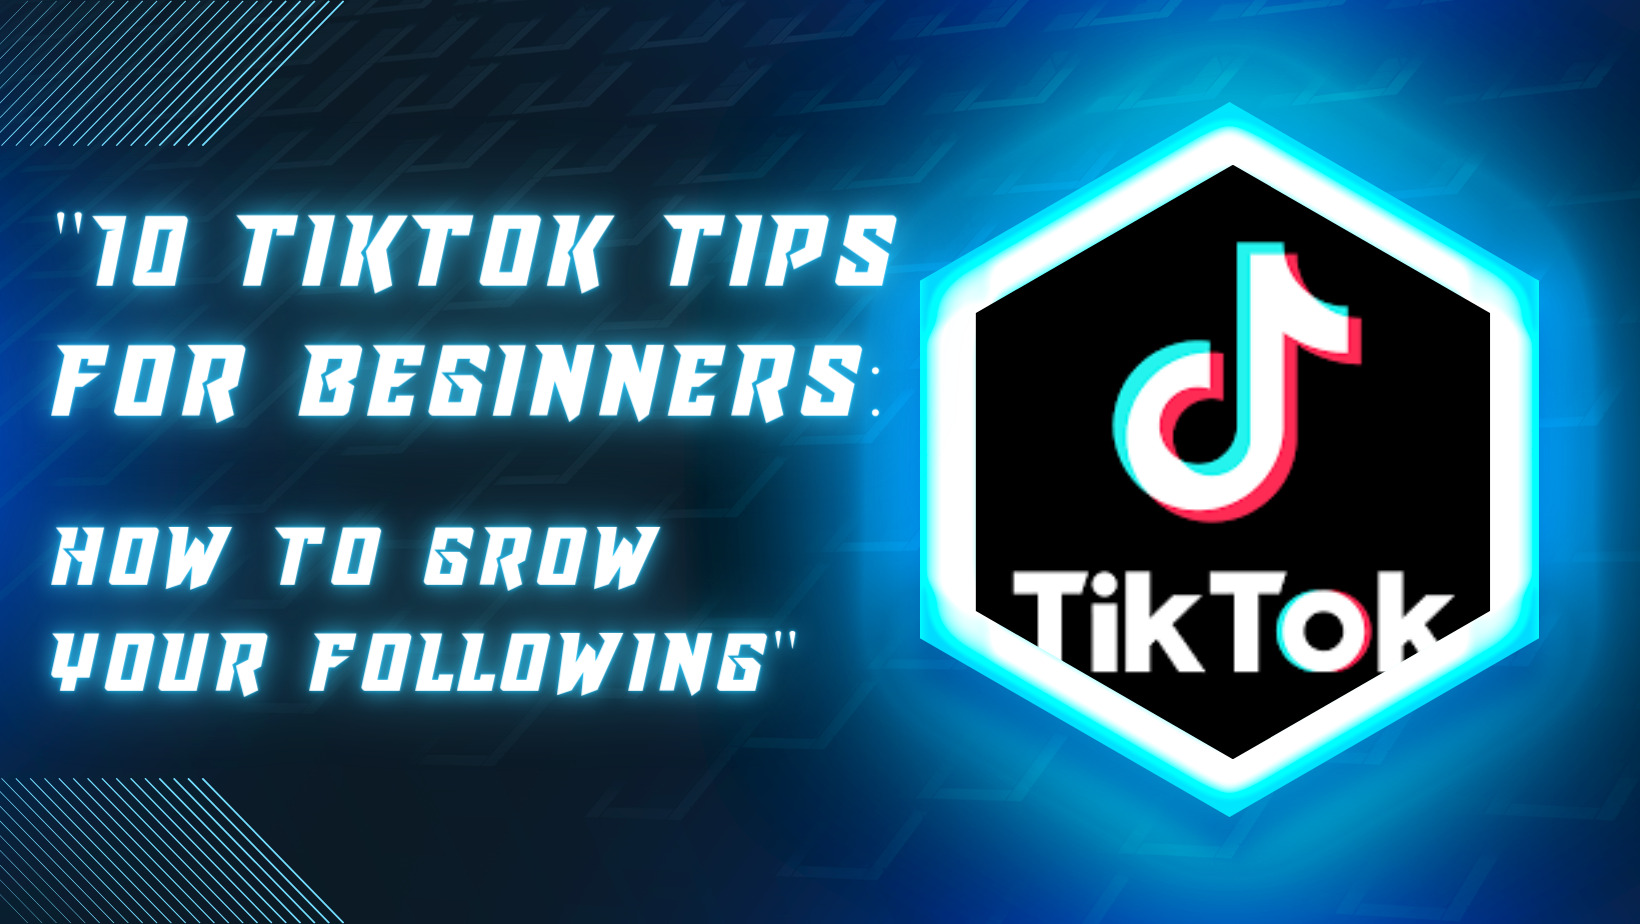 "10 TikTok Tips for Beginners: How to Grow Your Following"